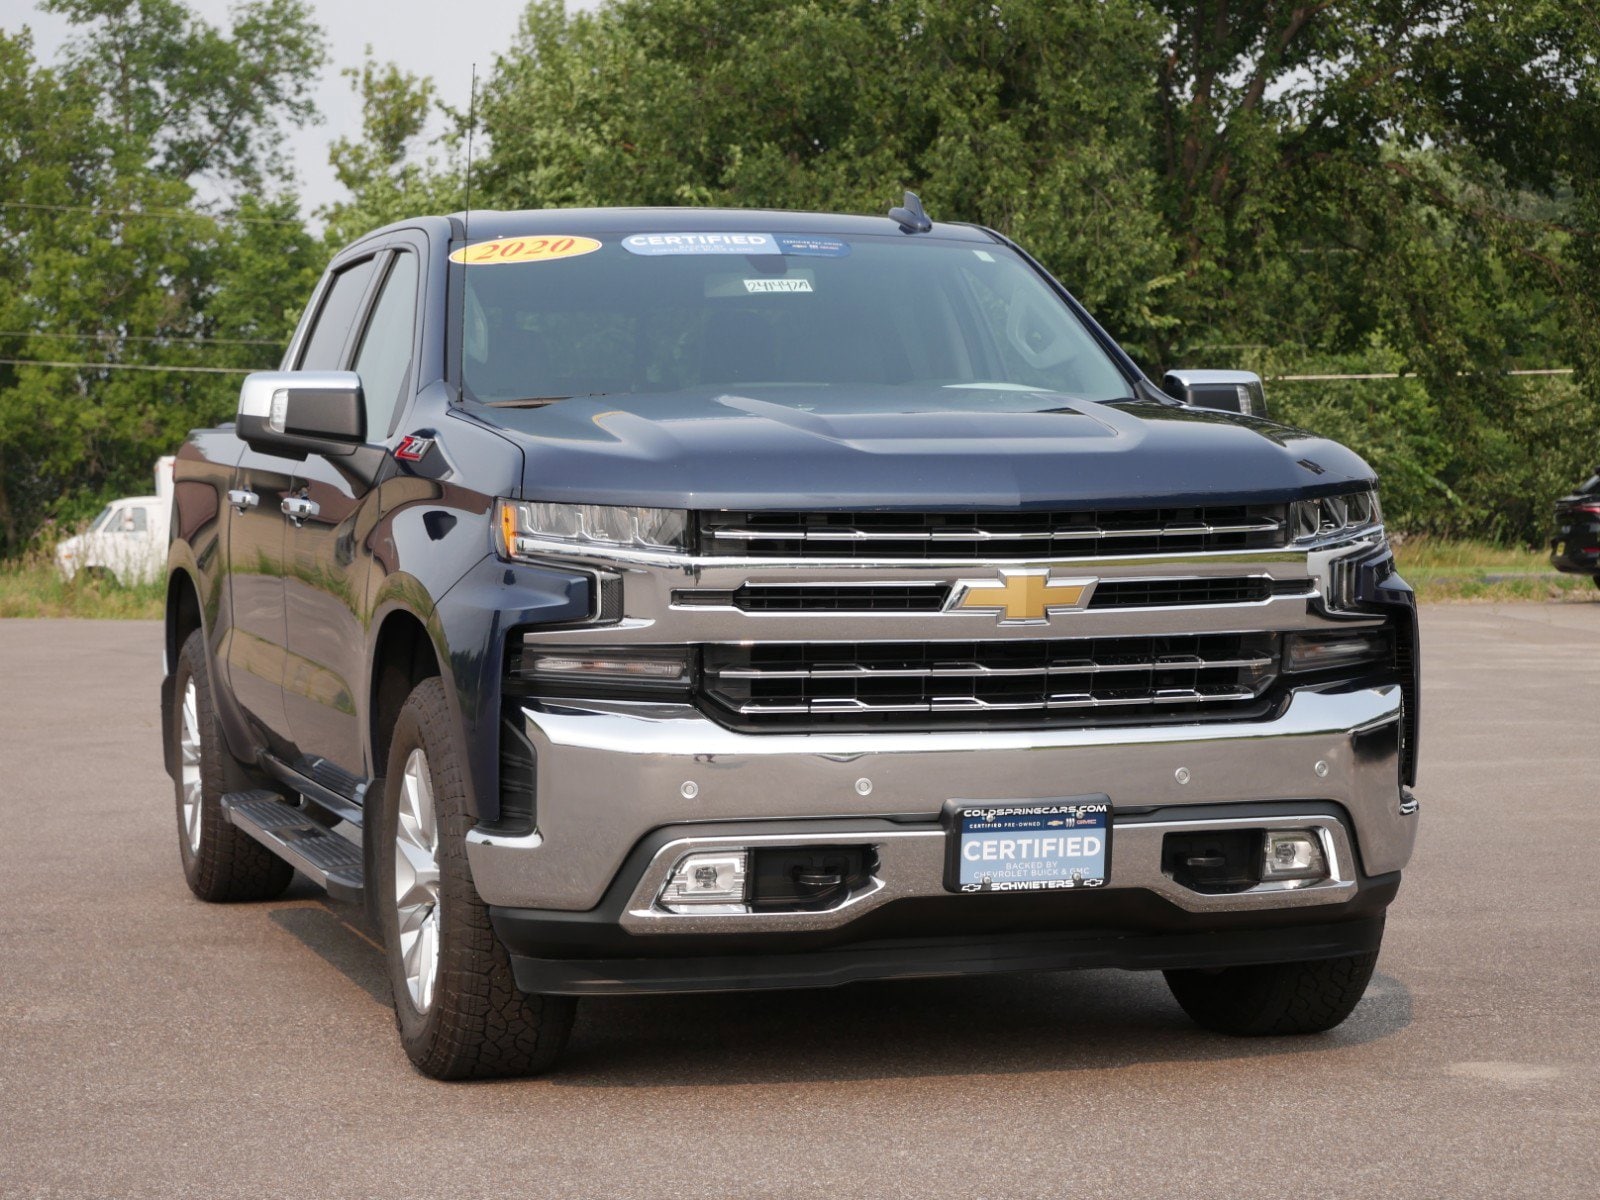 Certified 2020 Chevrolet Silverado 1500 LTZ with VIN 1GCUYGED9LZ212345 for sale in Cold Spring, Minnesota